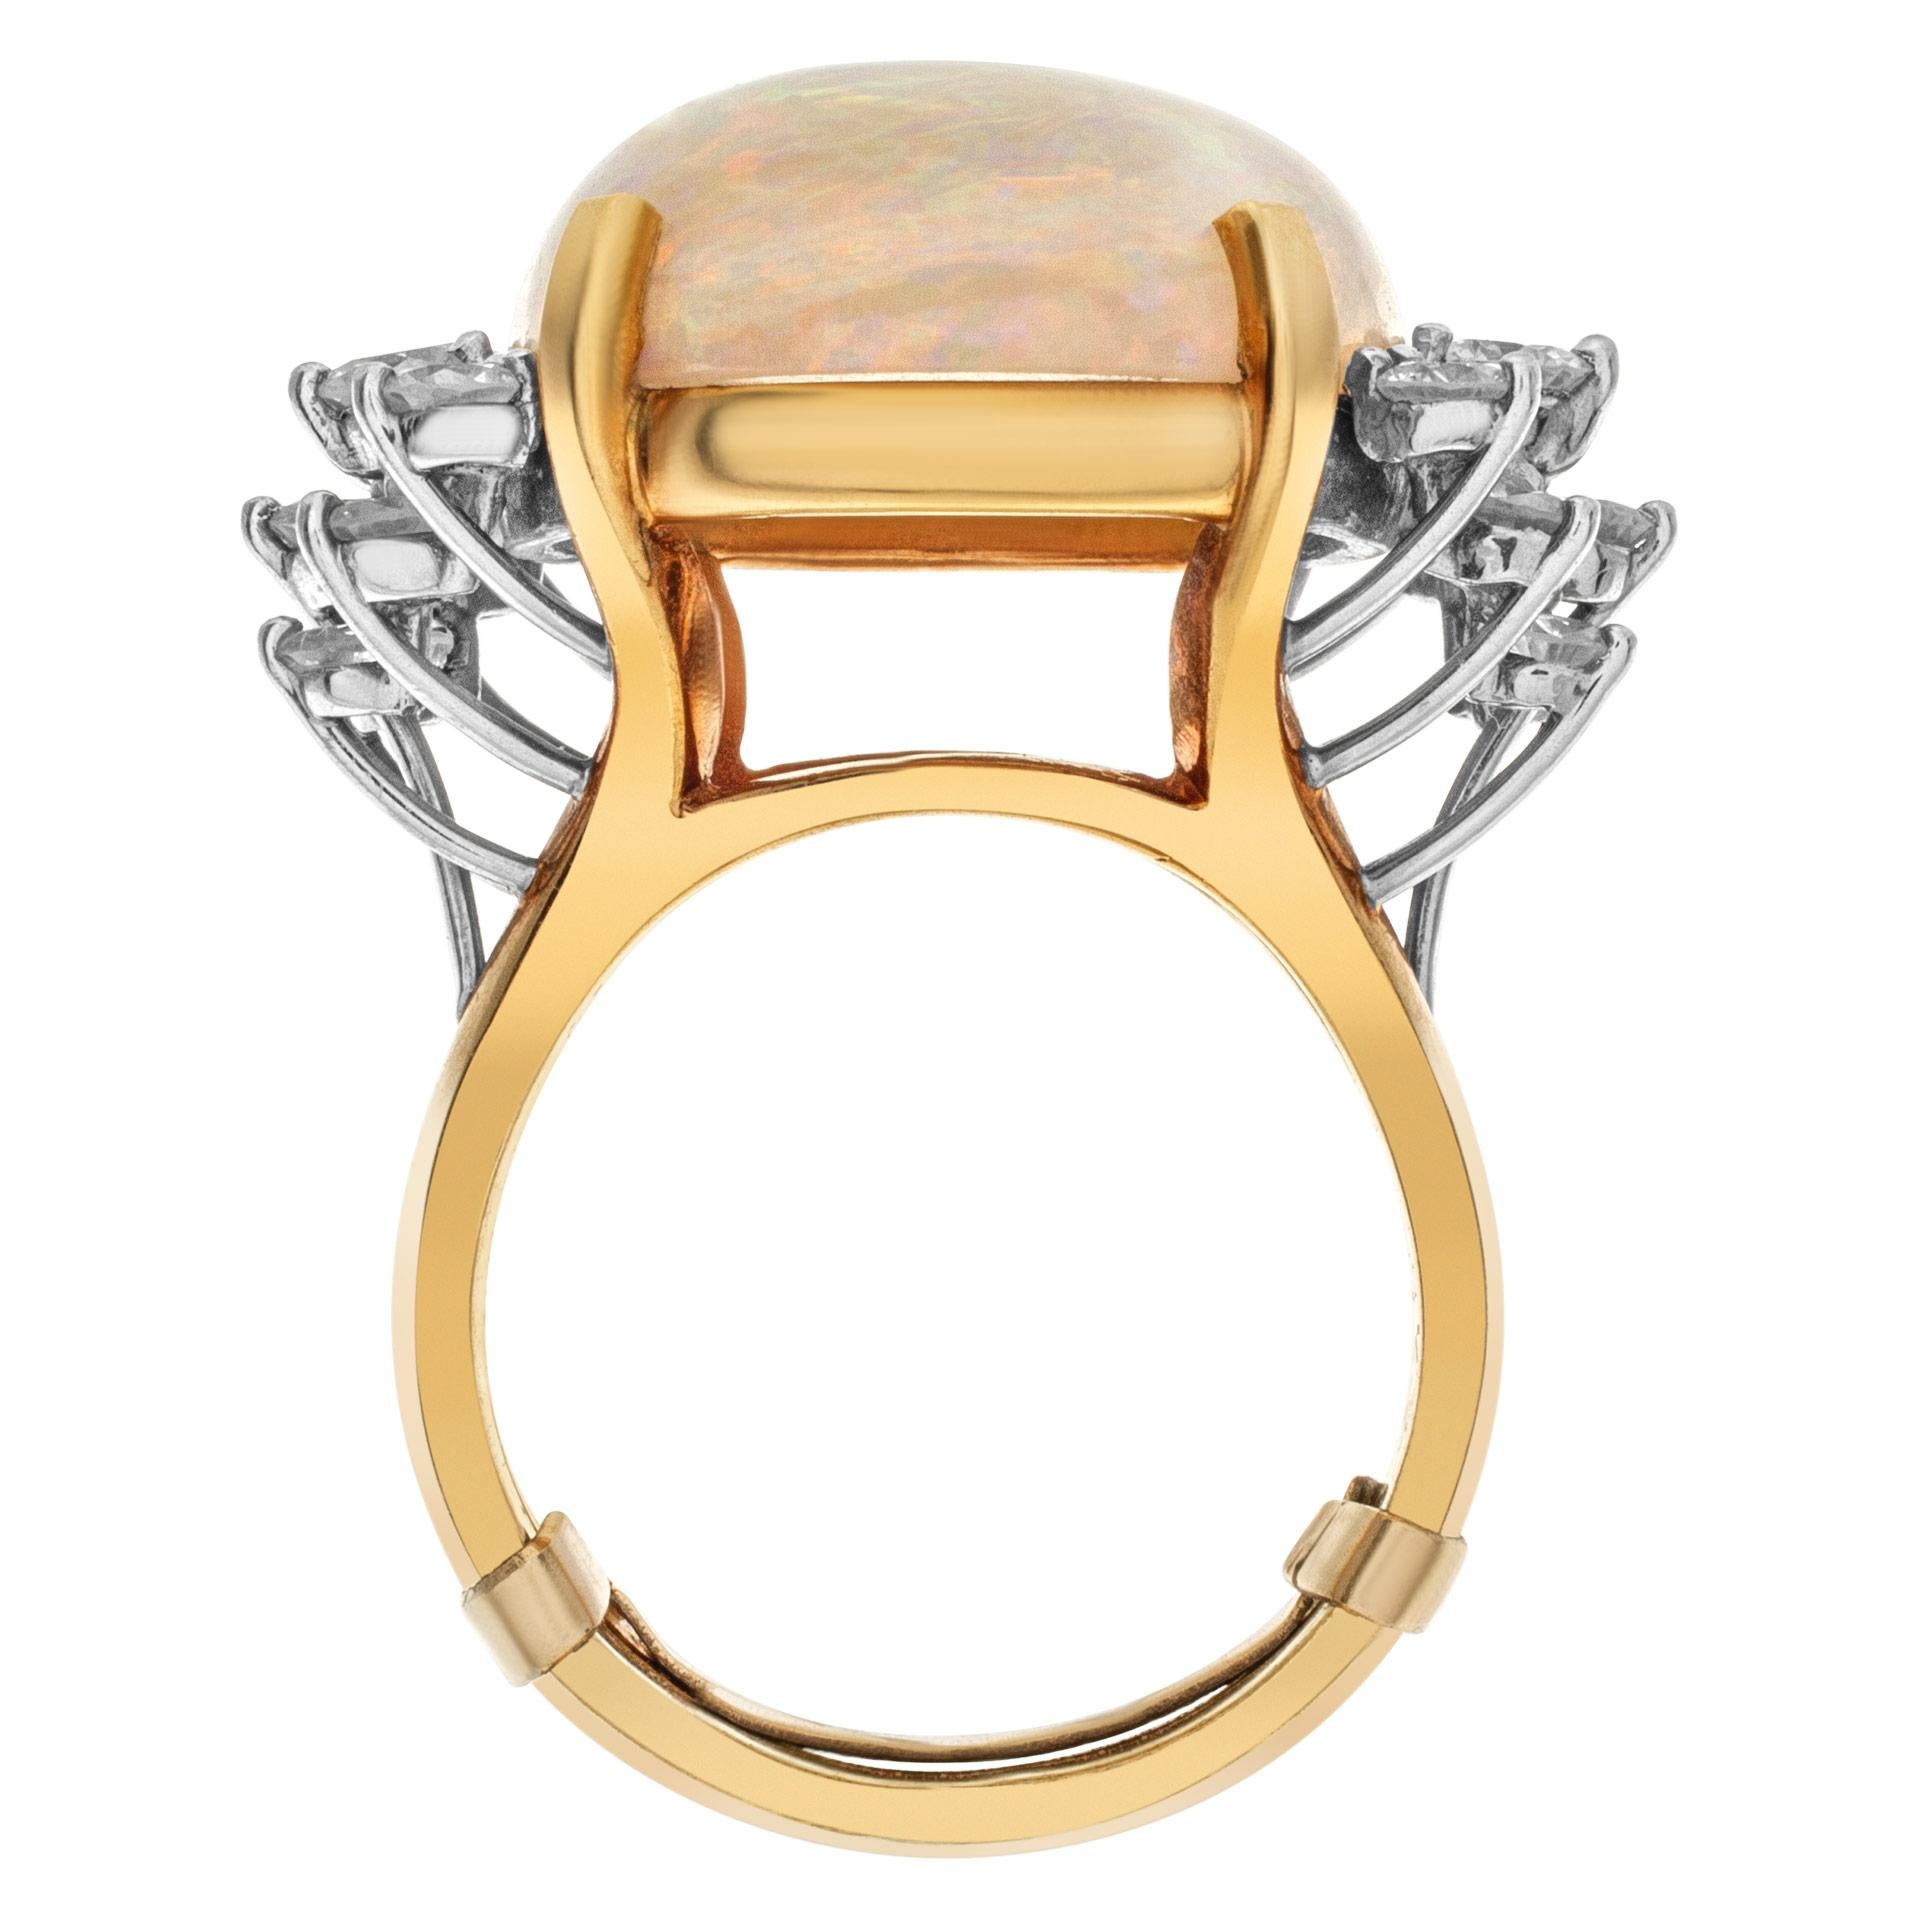 ESTIMATED RETAIL: $6,300 YOUR PRICE: $5,400 - Australian opal and diamond ring set in 18k white and yellow gold with an approximate 25 carat opal accented with approximately 2 carats in diamonds. Diamonds estimate (G color, VS clarity). GAL